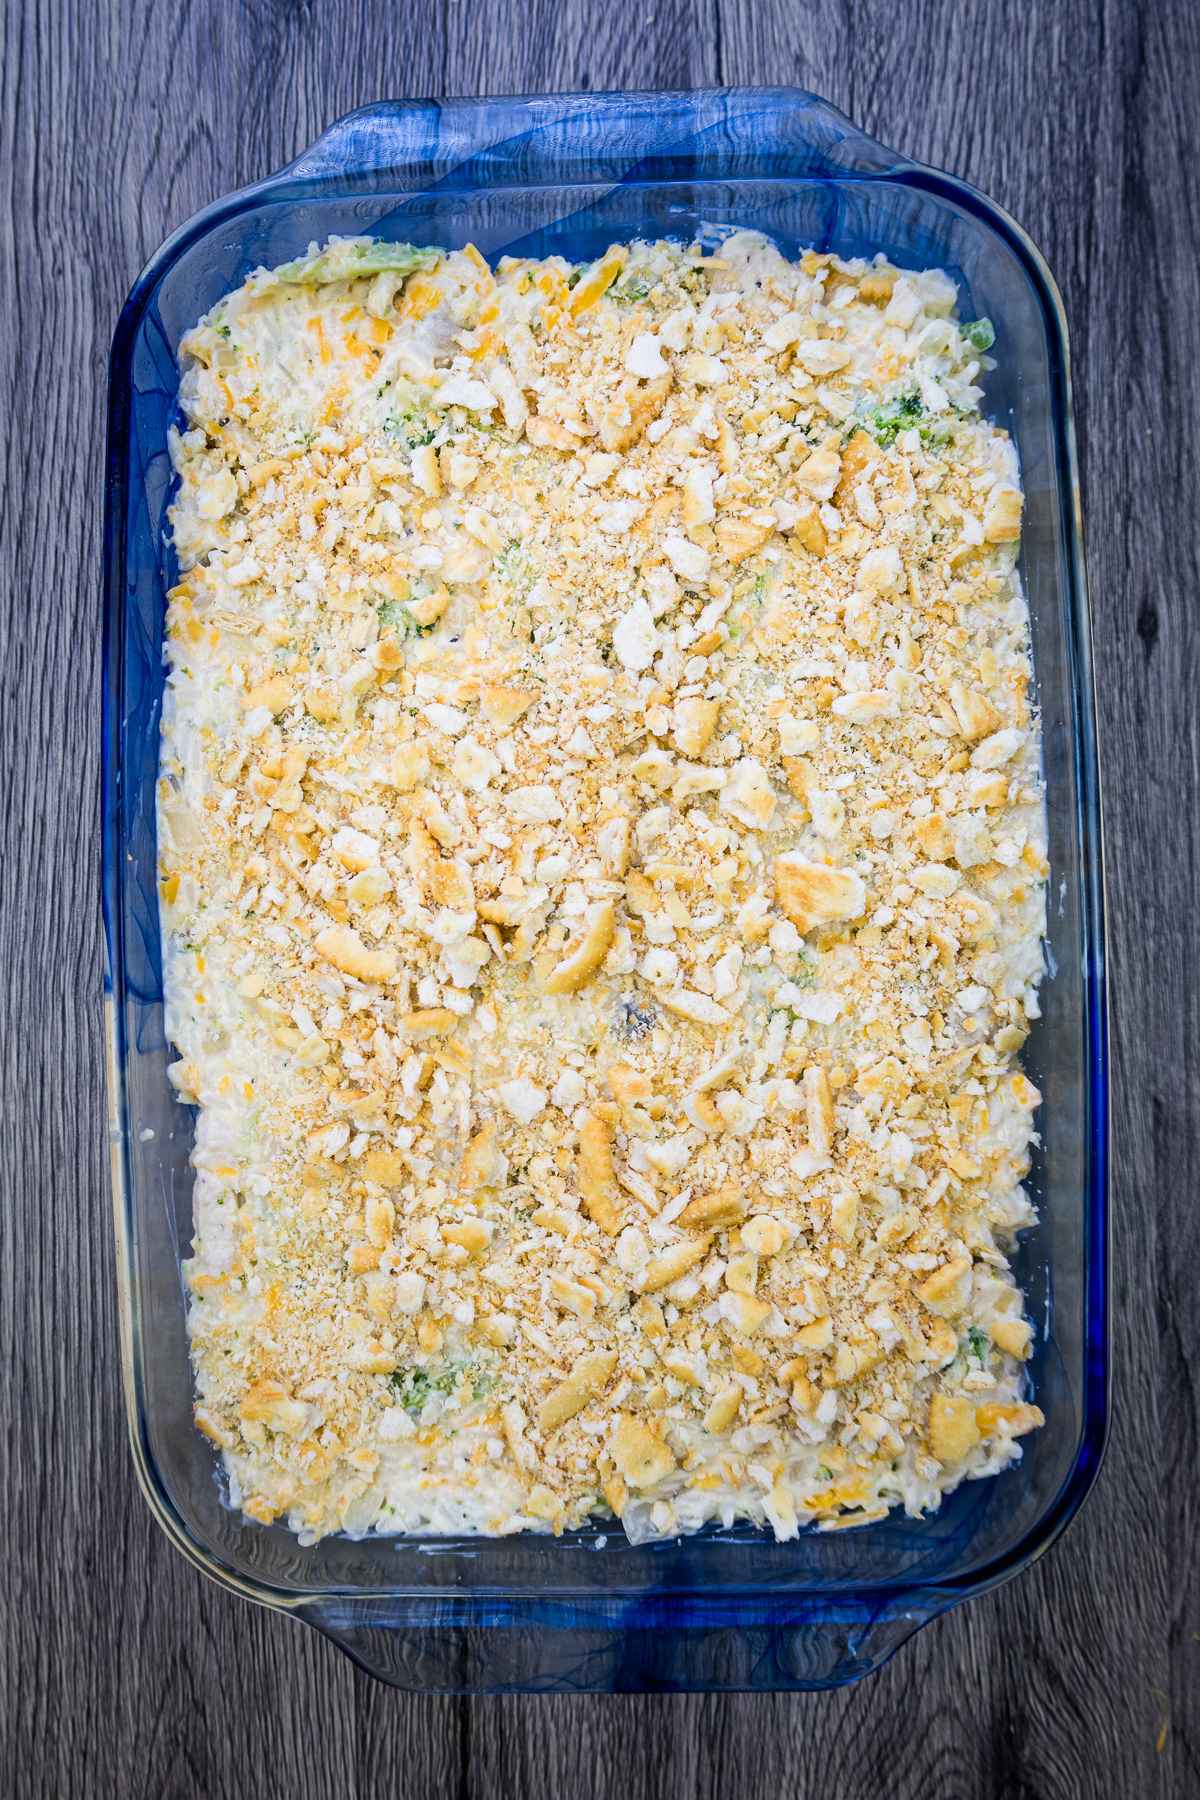 Assembled and unbaked casserole.